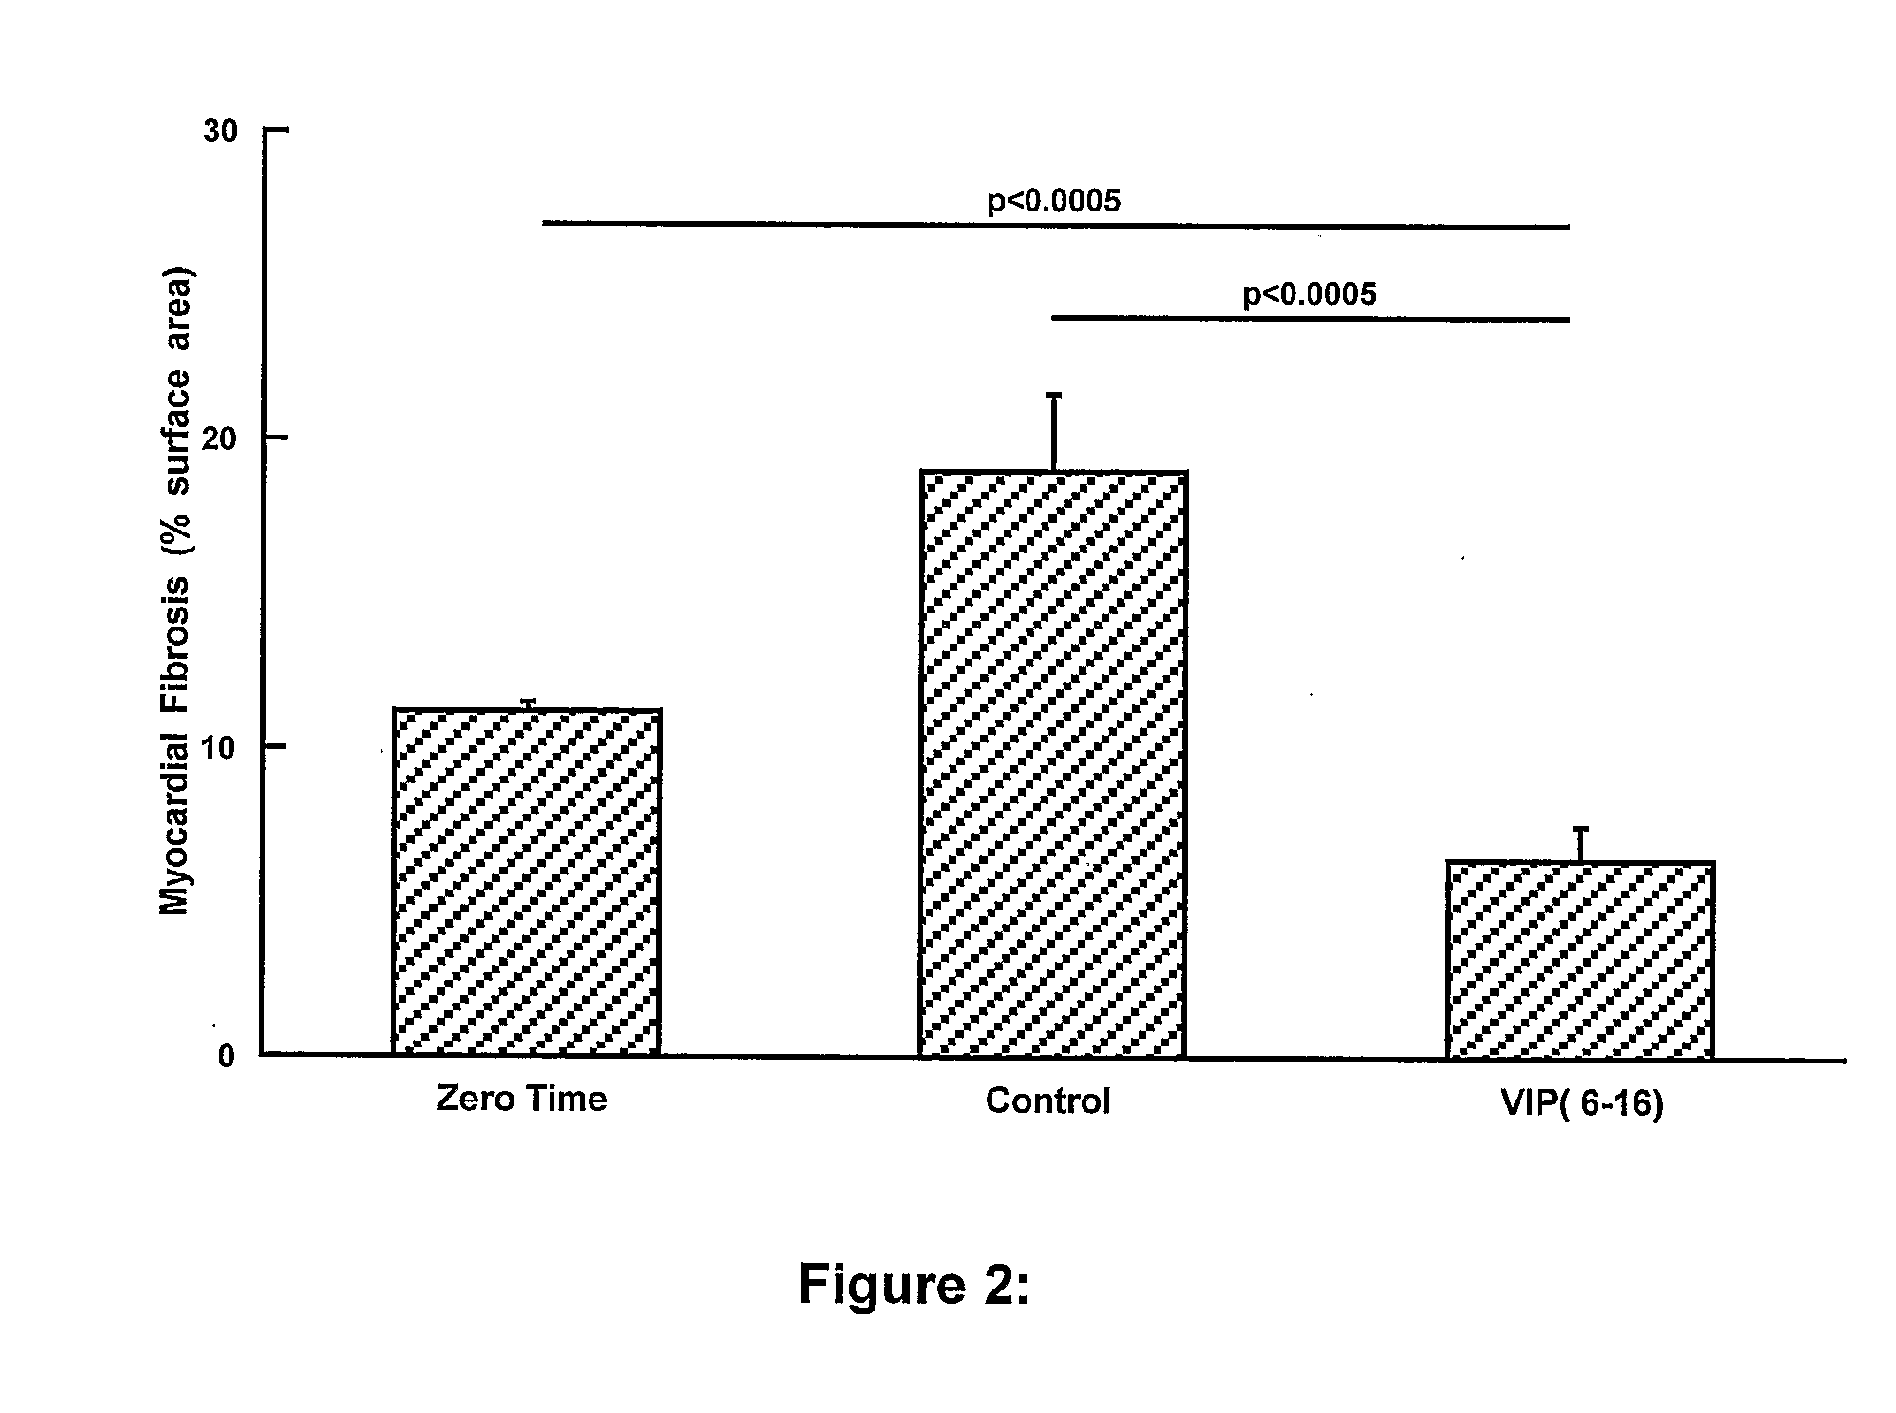 Vip Fragments and Methods of Use